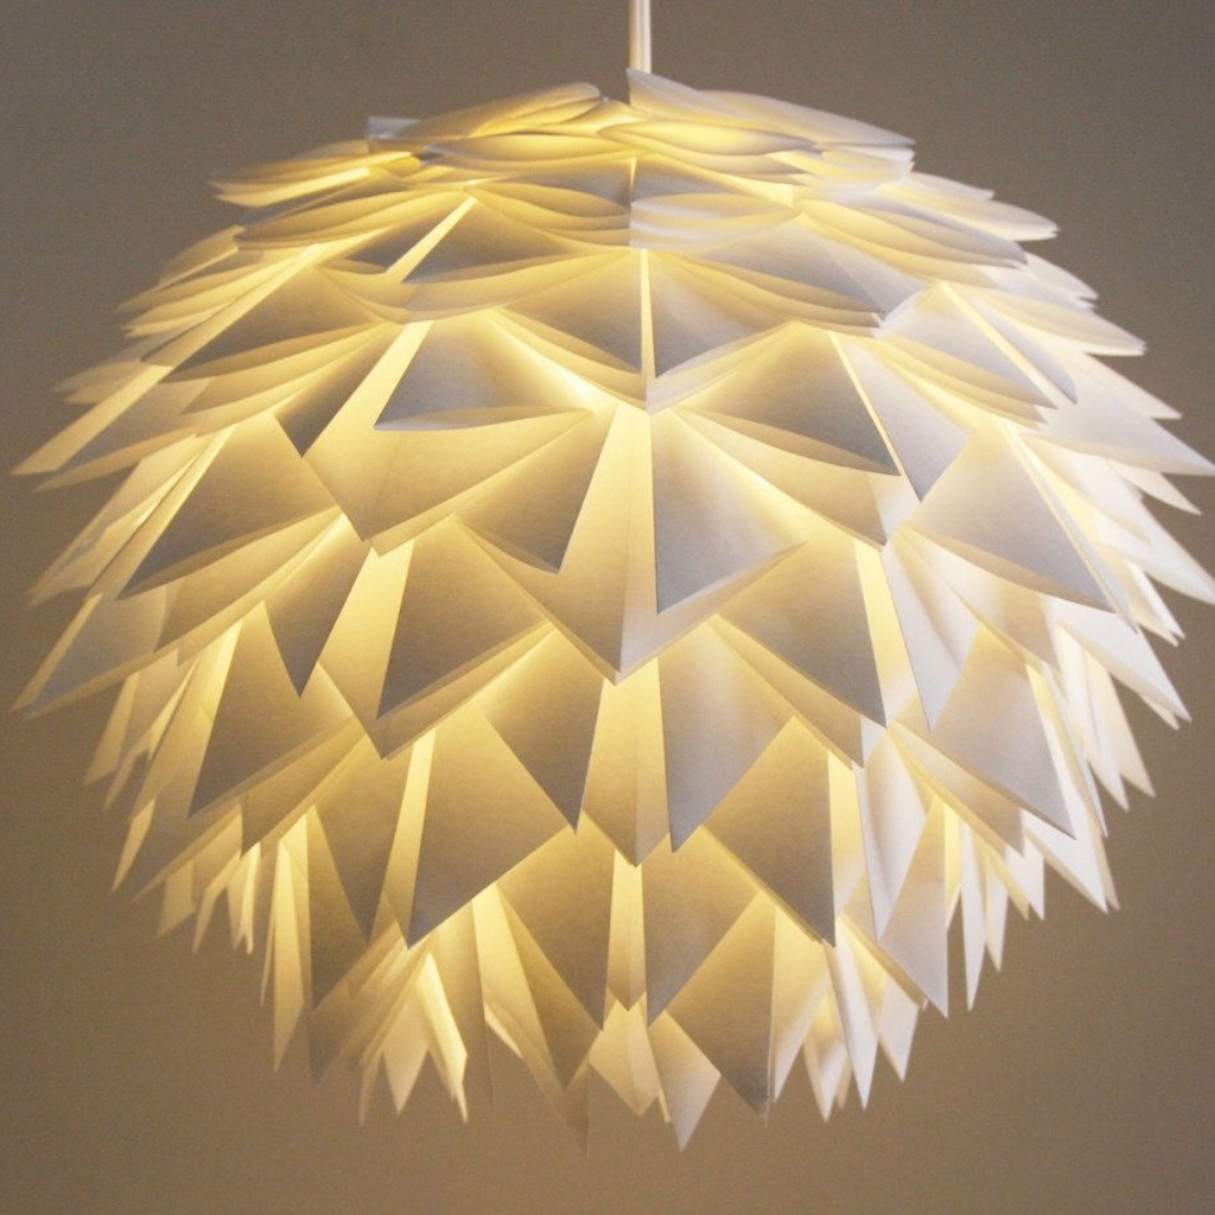 How To Make A Paper Lamp Shades